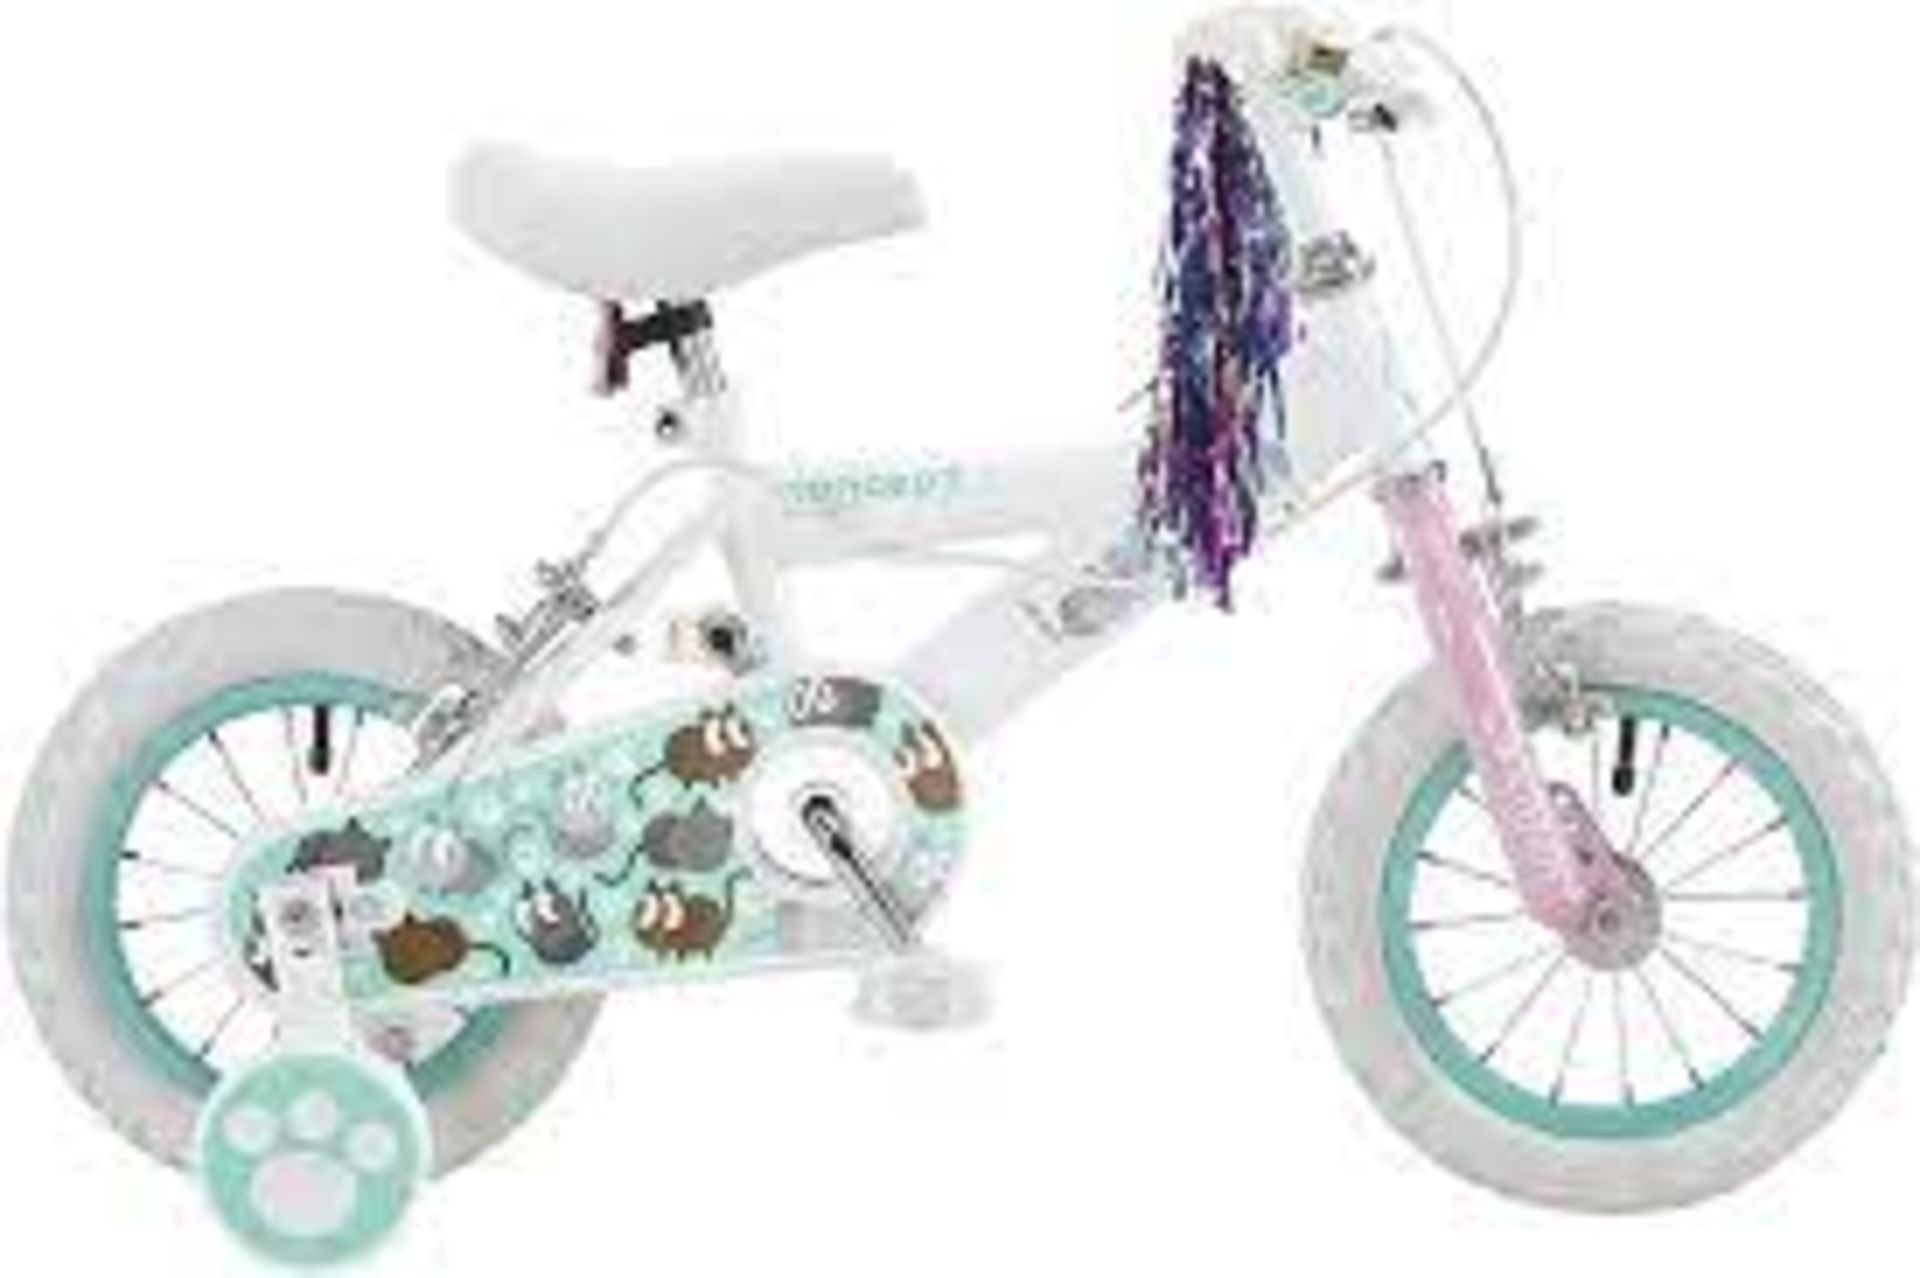 NEW BOXED Insync Kitten 12" Wheel Girls Bicycle RRP £149.99 (ROW7). Has a full chain guard which